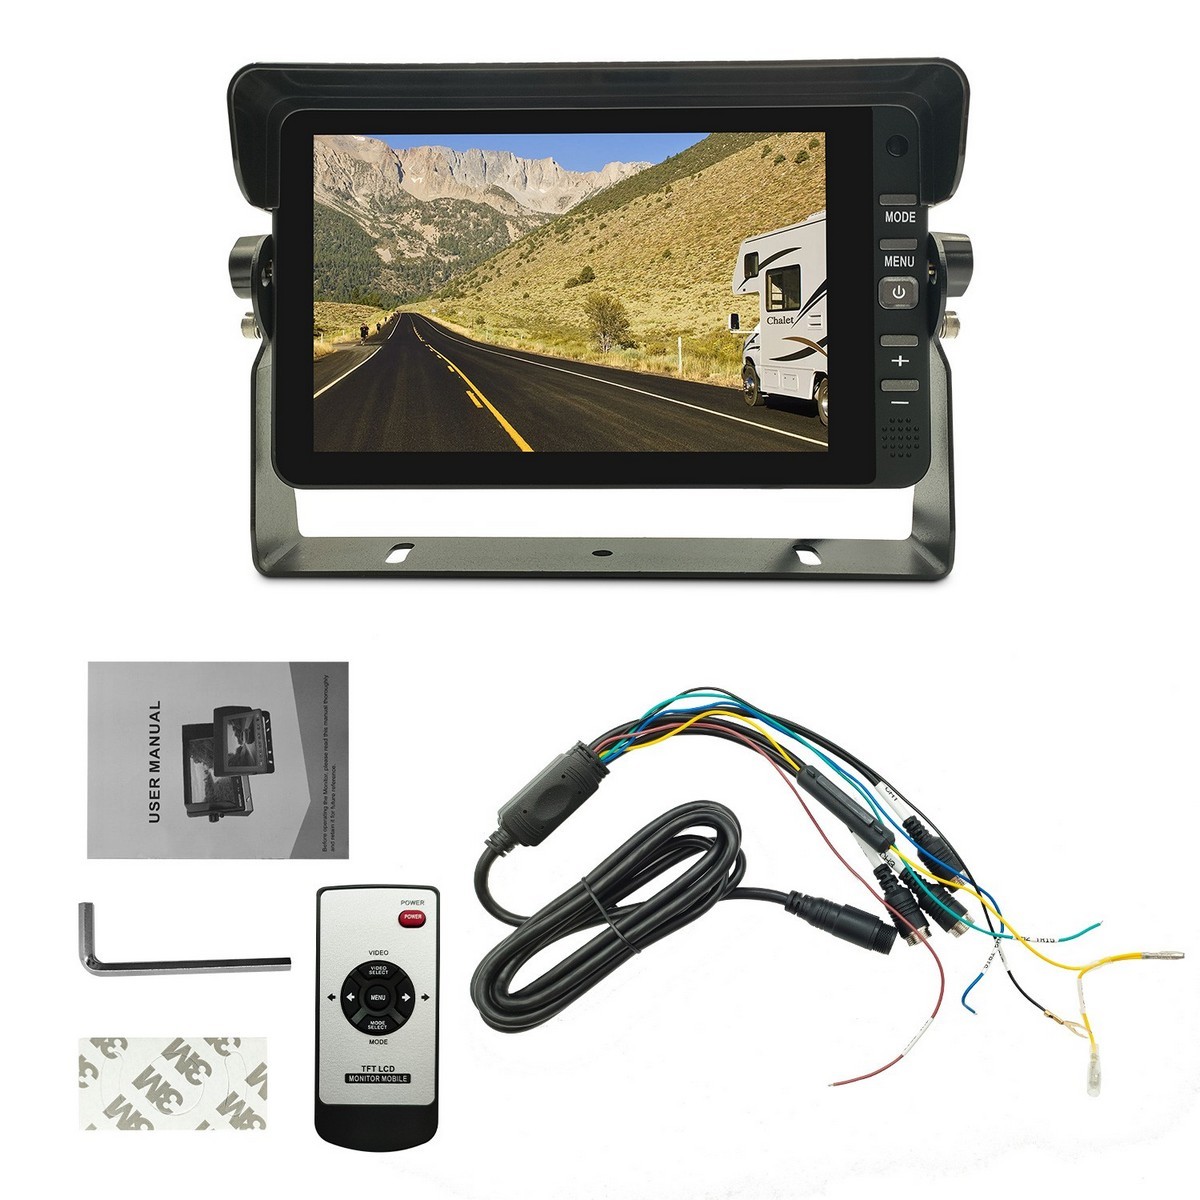 7 inch car monitor - package contents